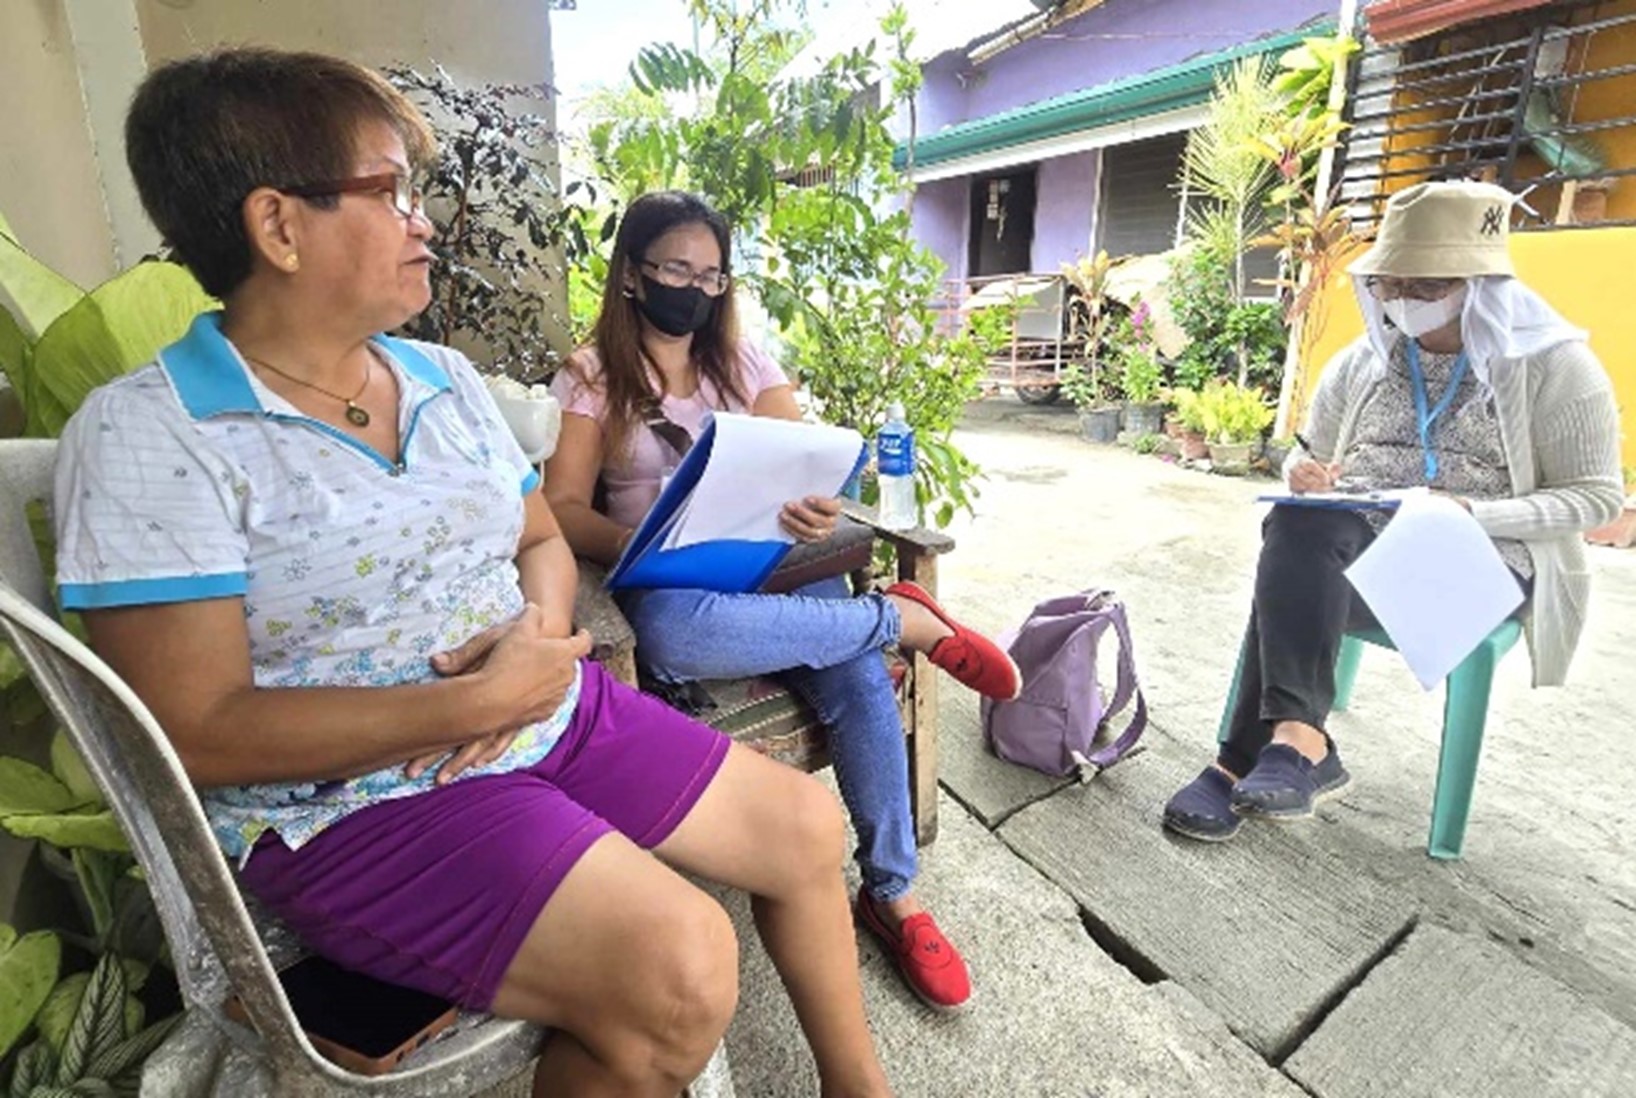 civil society representatives from Iloilo City gathering data on the $3 million local socialized housing project. The activity was a collaboration with the City Government of Iloilo and concerned national government agencies and supported by USAID’s Cities for Enhanced Governance and Engagement (CHANGE) Project